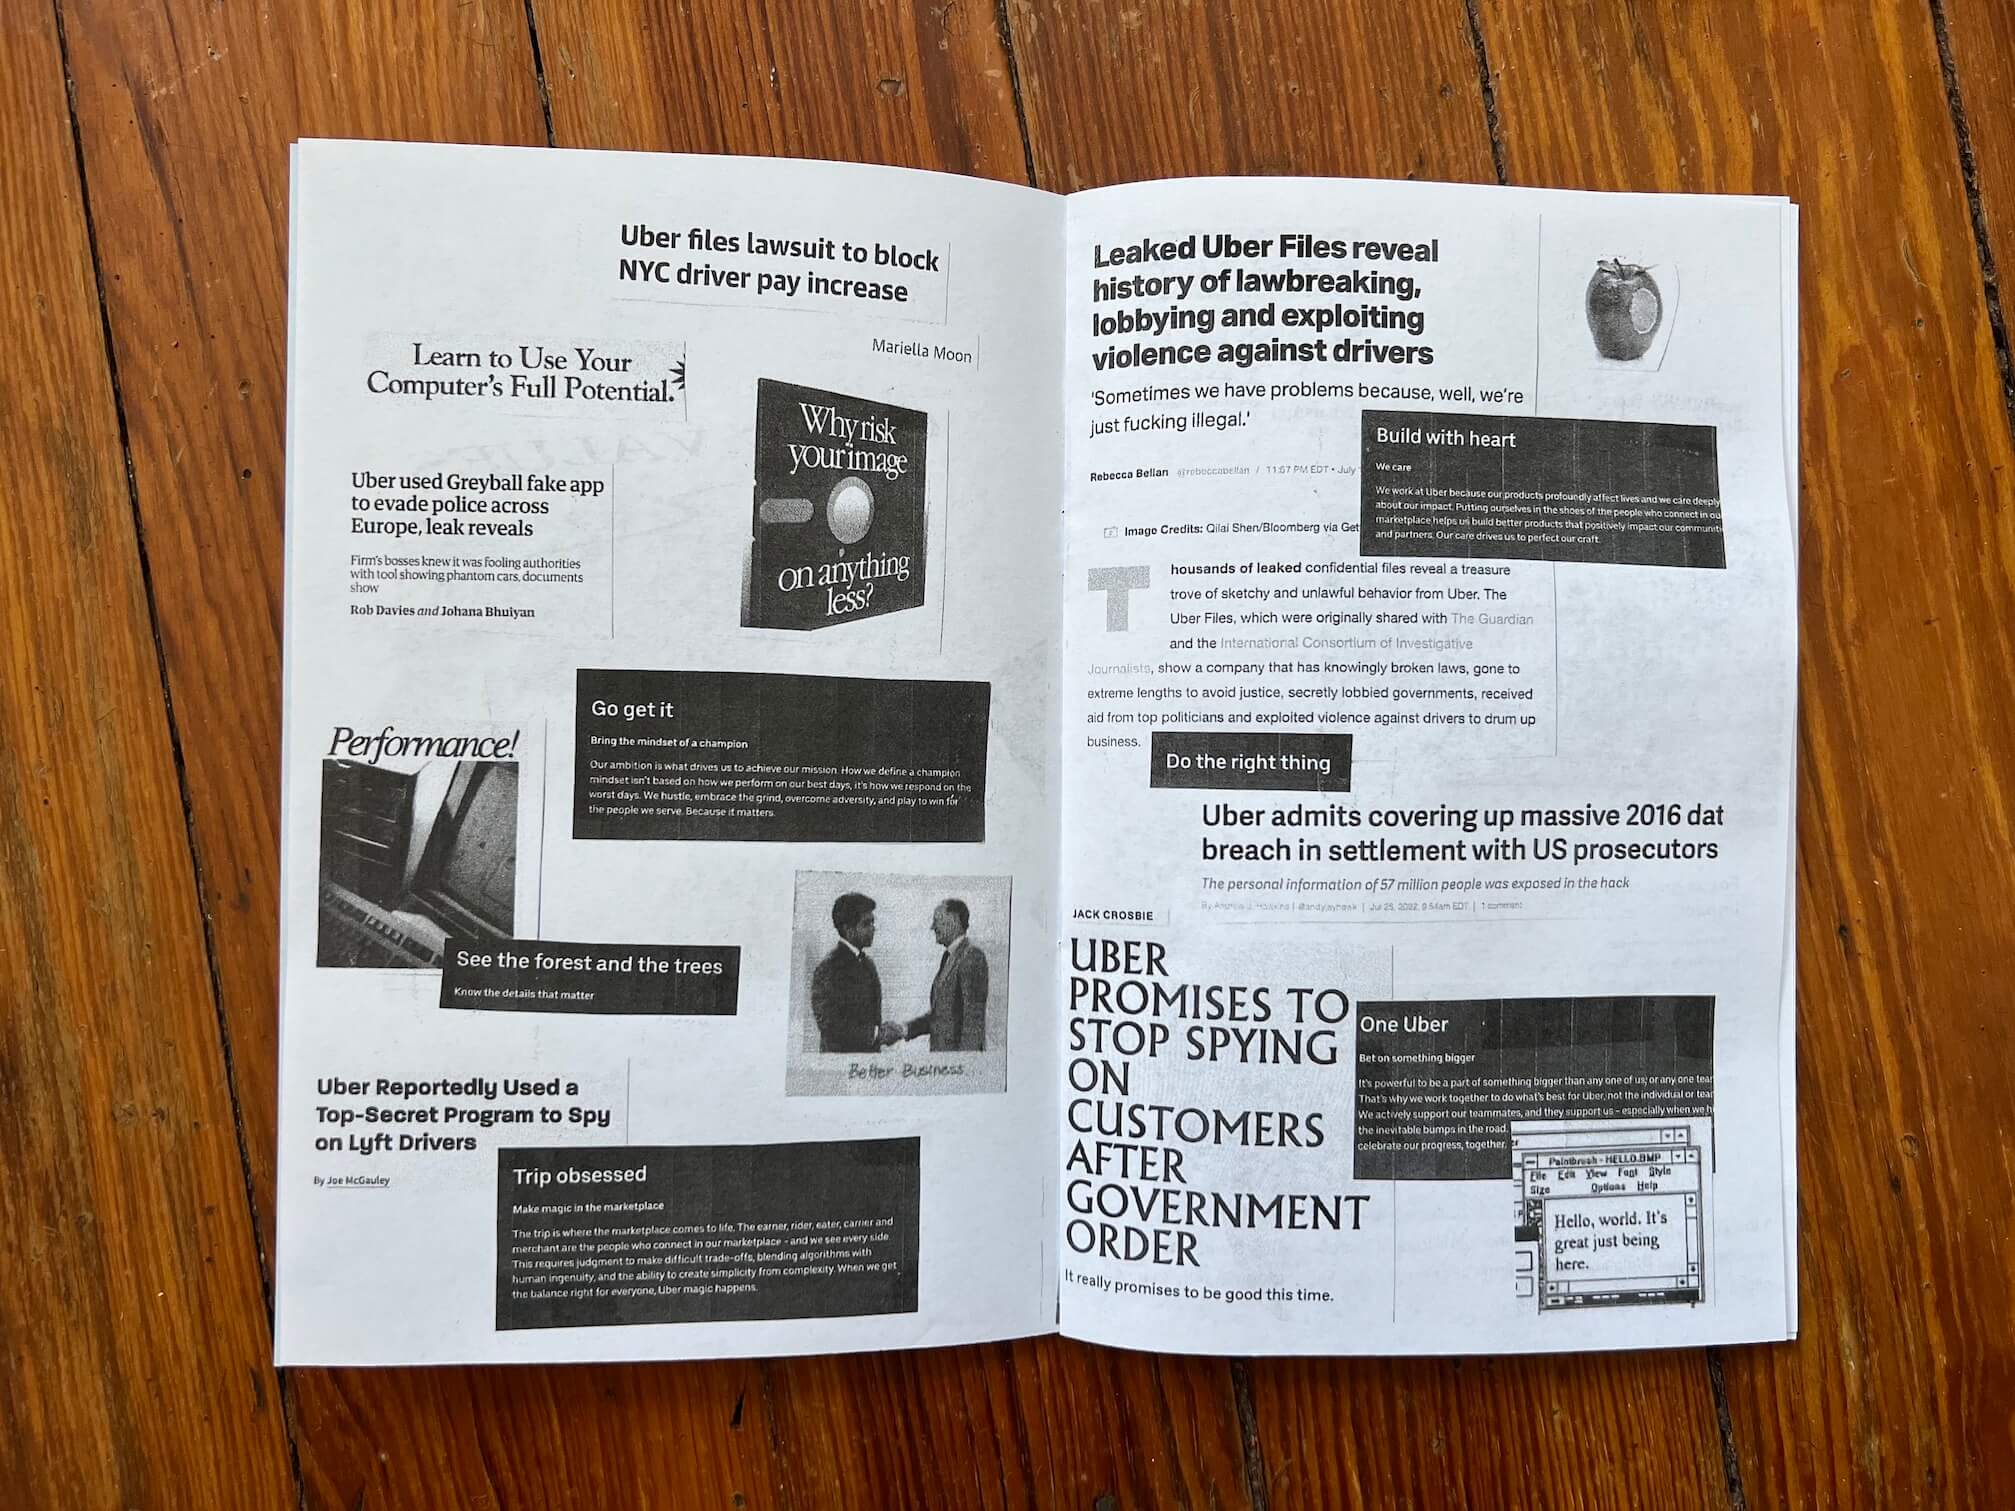 A spread in the zine about Uber's core values, like 'Do The Right Thing,' and news article headlines about Uber, such as 'Uber Promises To Stop Spying On Customers After Government Order.'